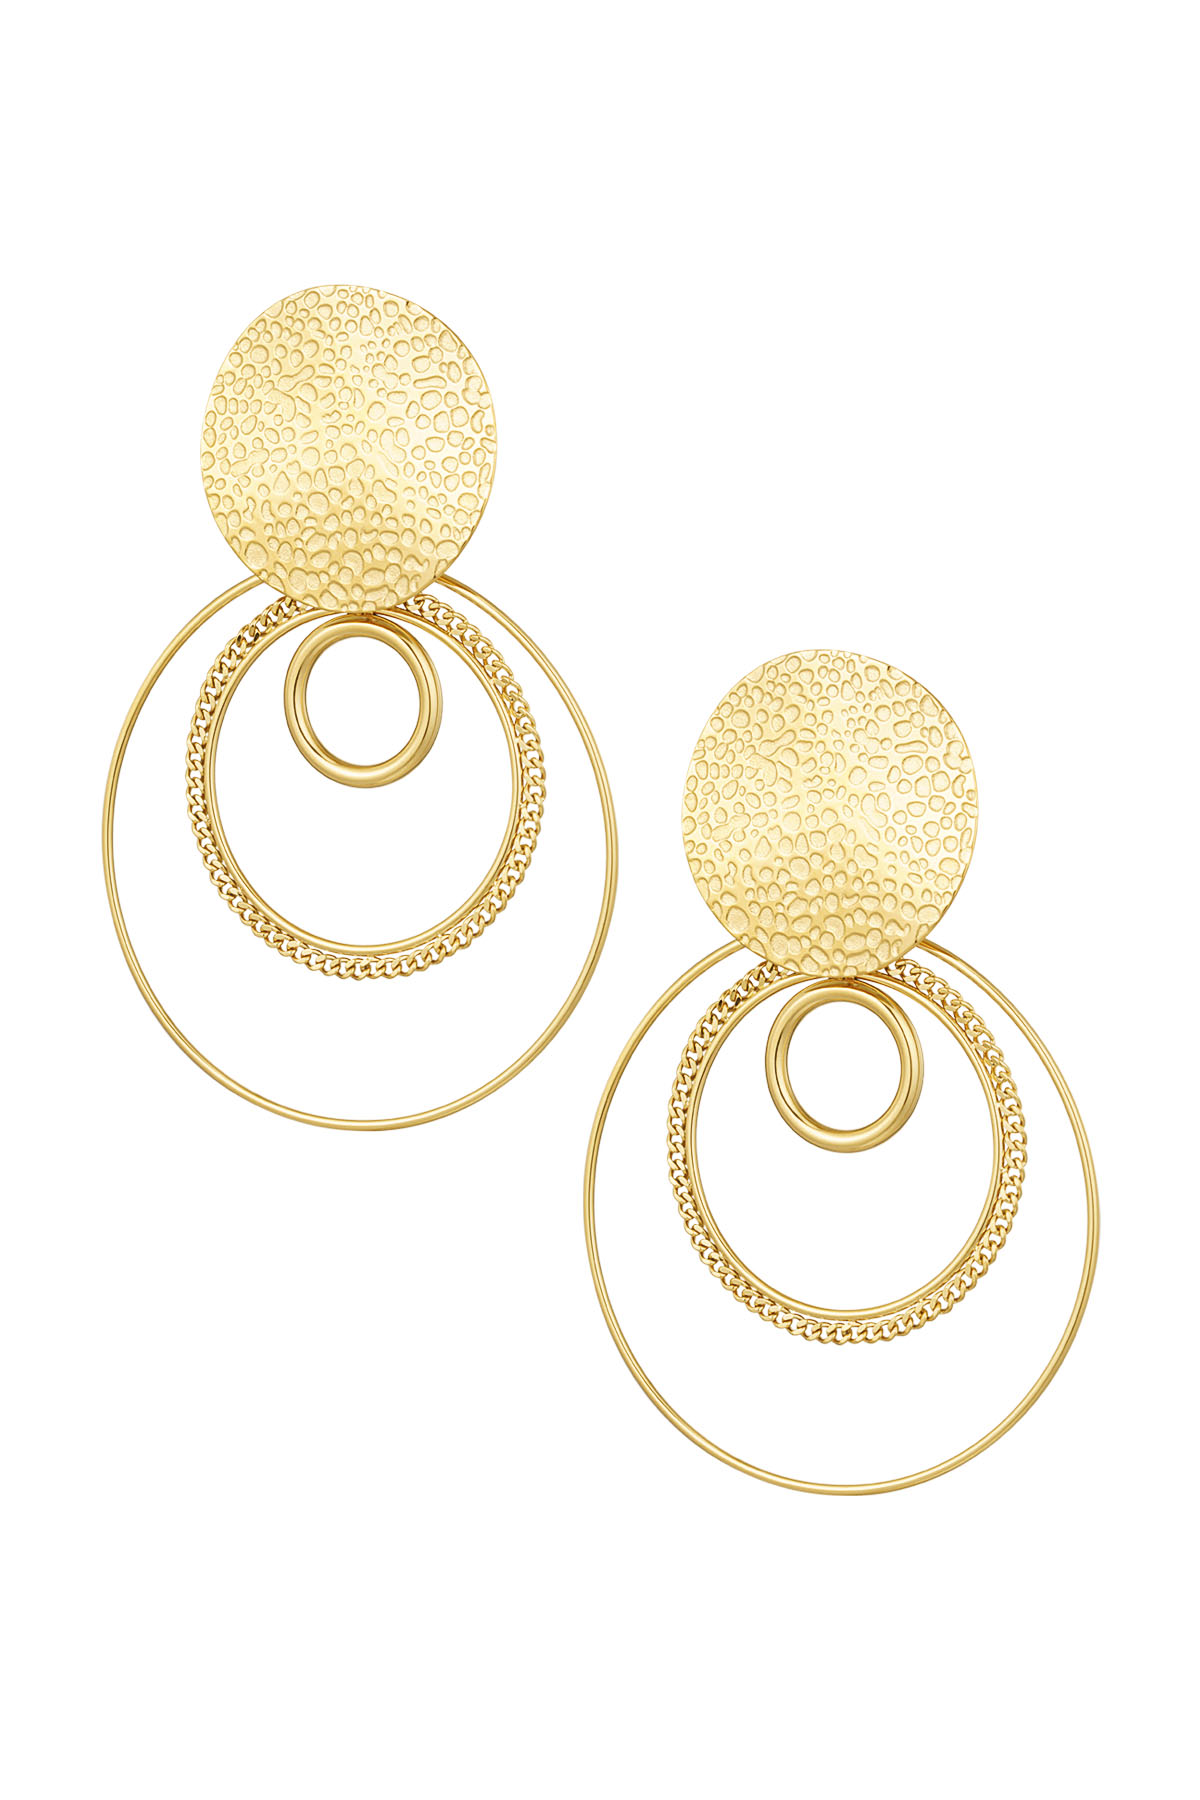 Earrings different rings - gold